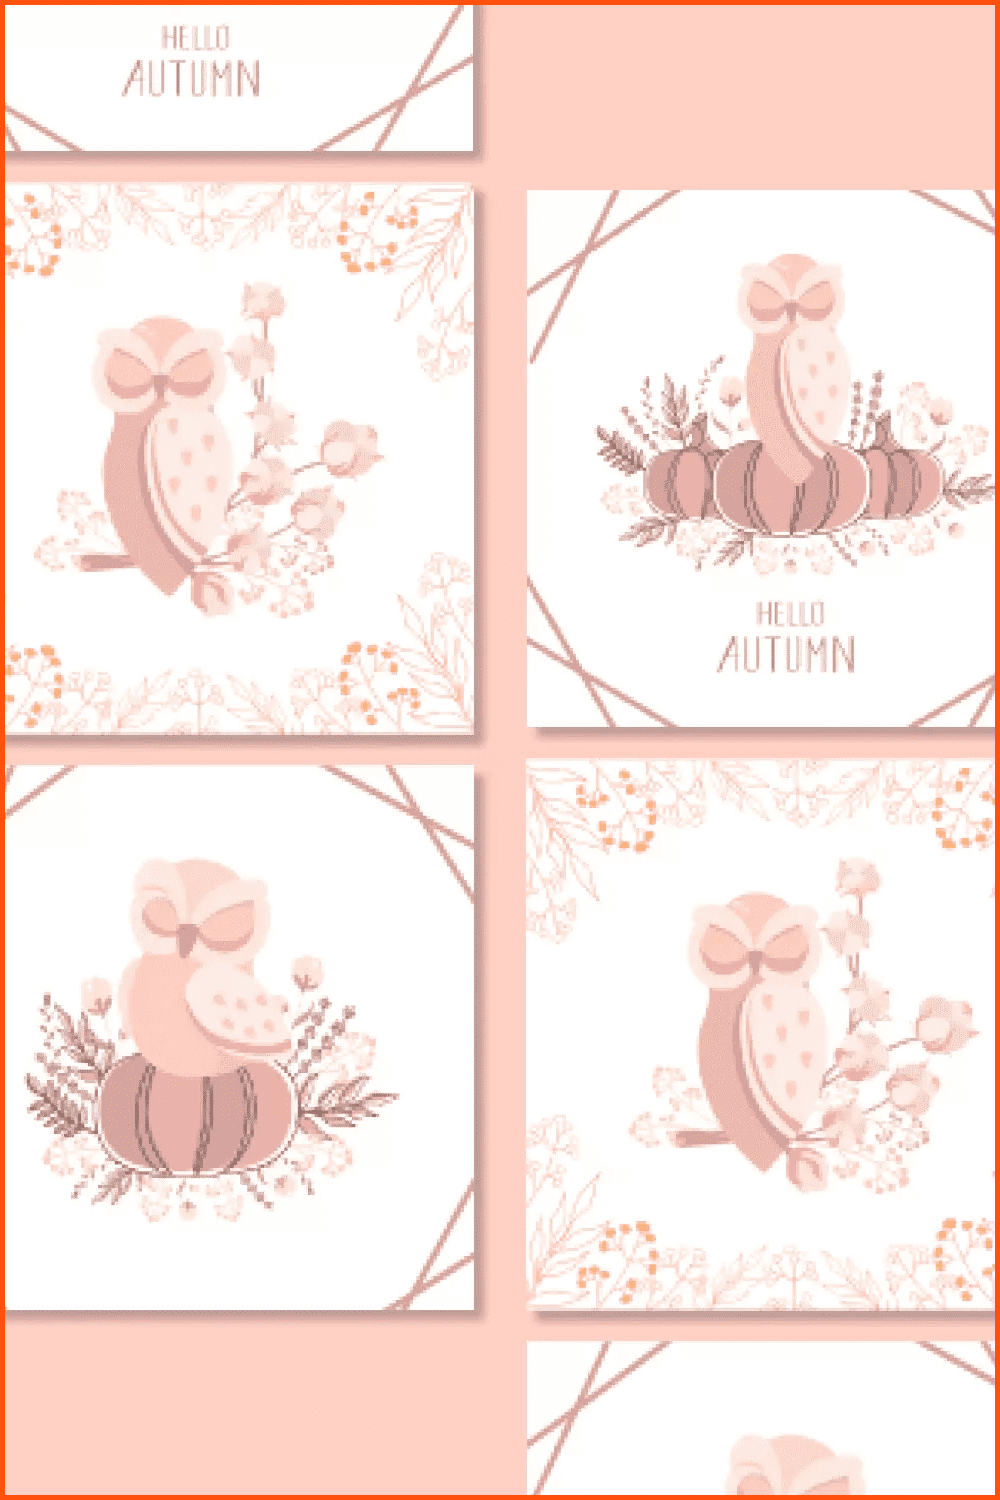 Collage of images of a painted owl on pumpkins and flowers.